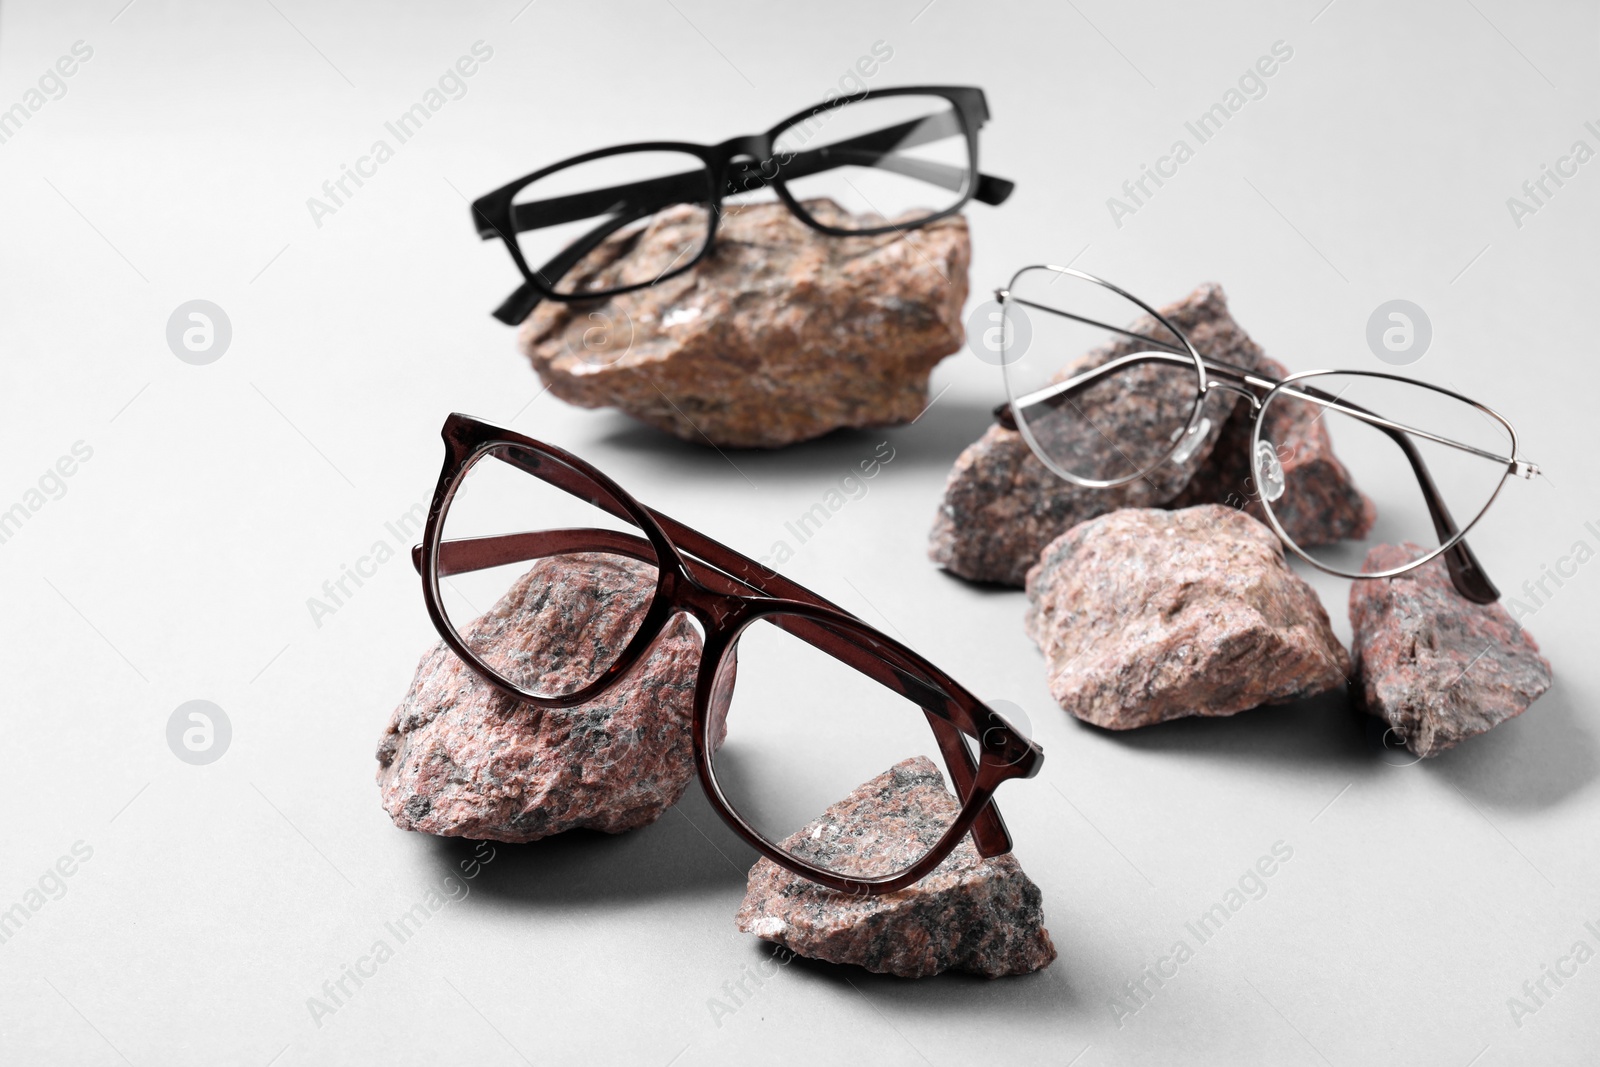 Photo of Different stylish glasses on stones against white background